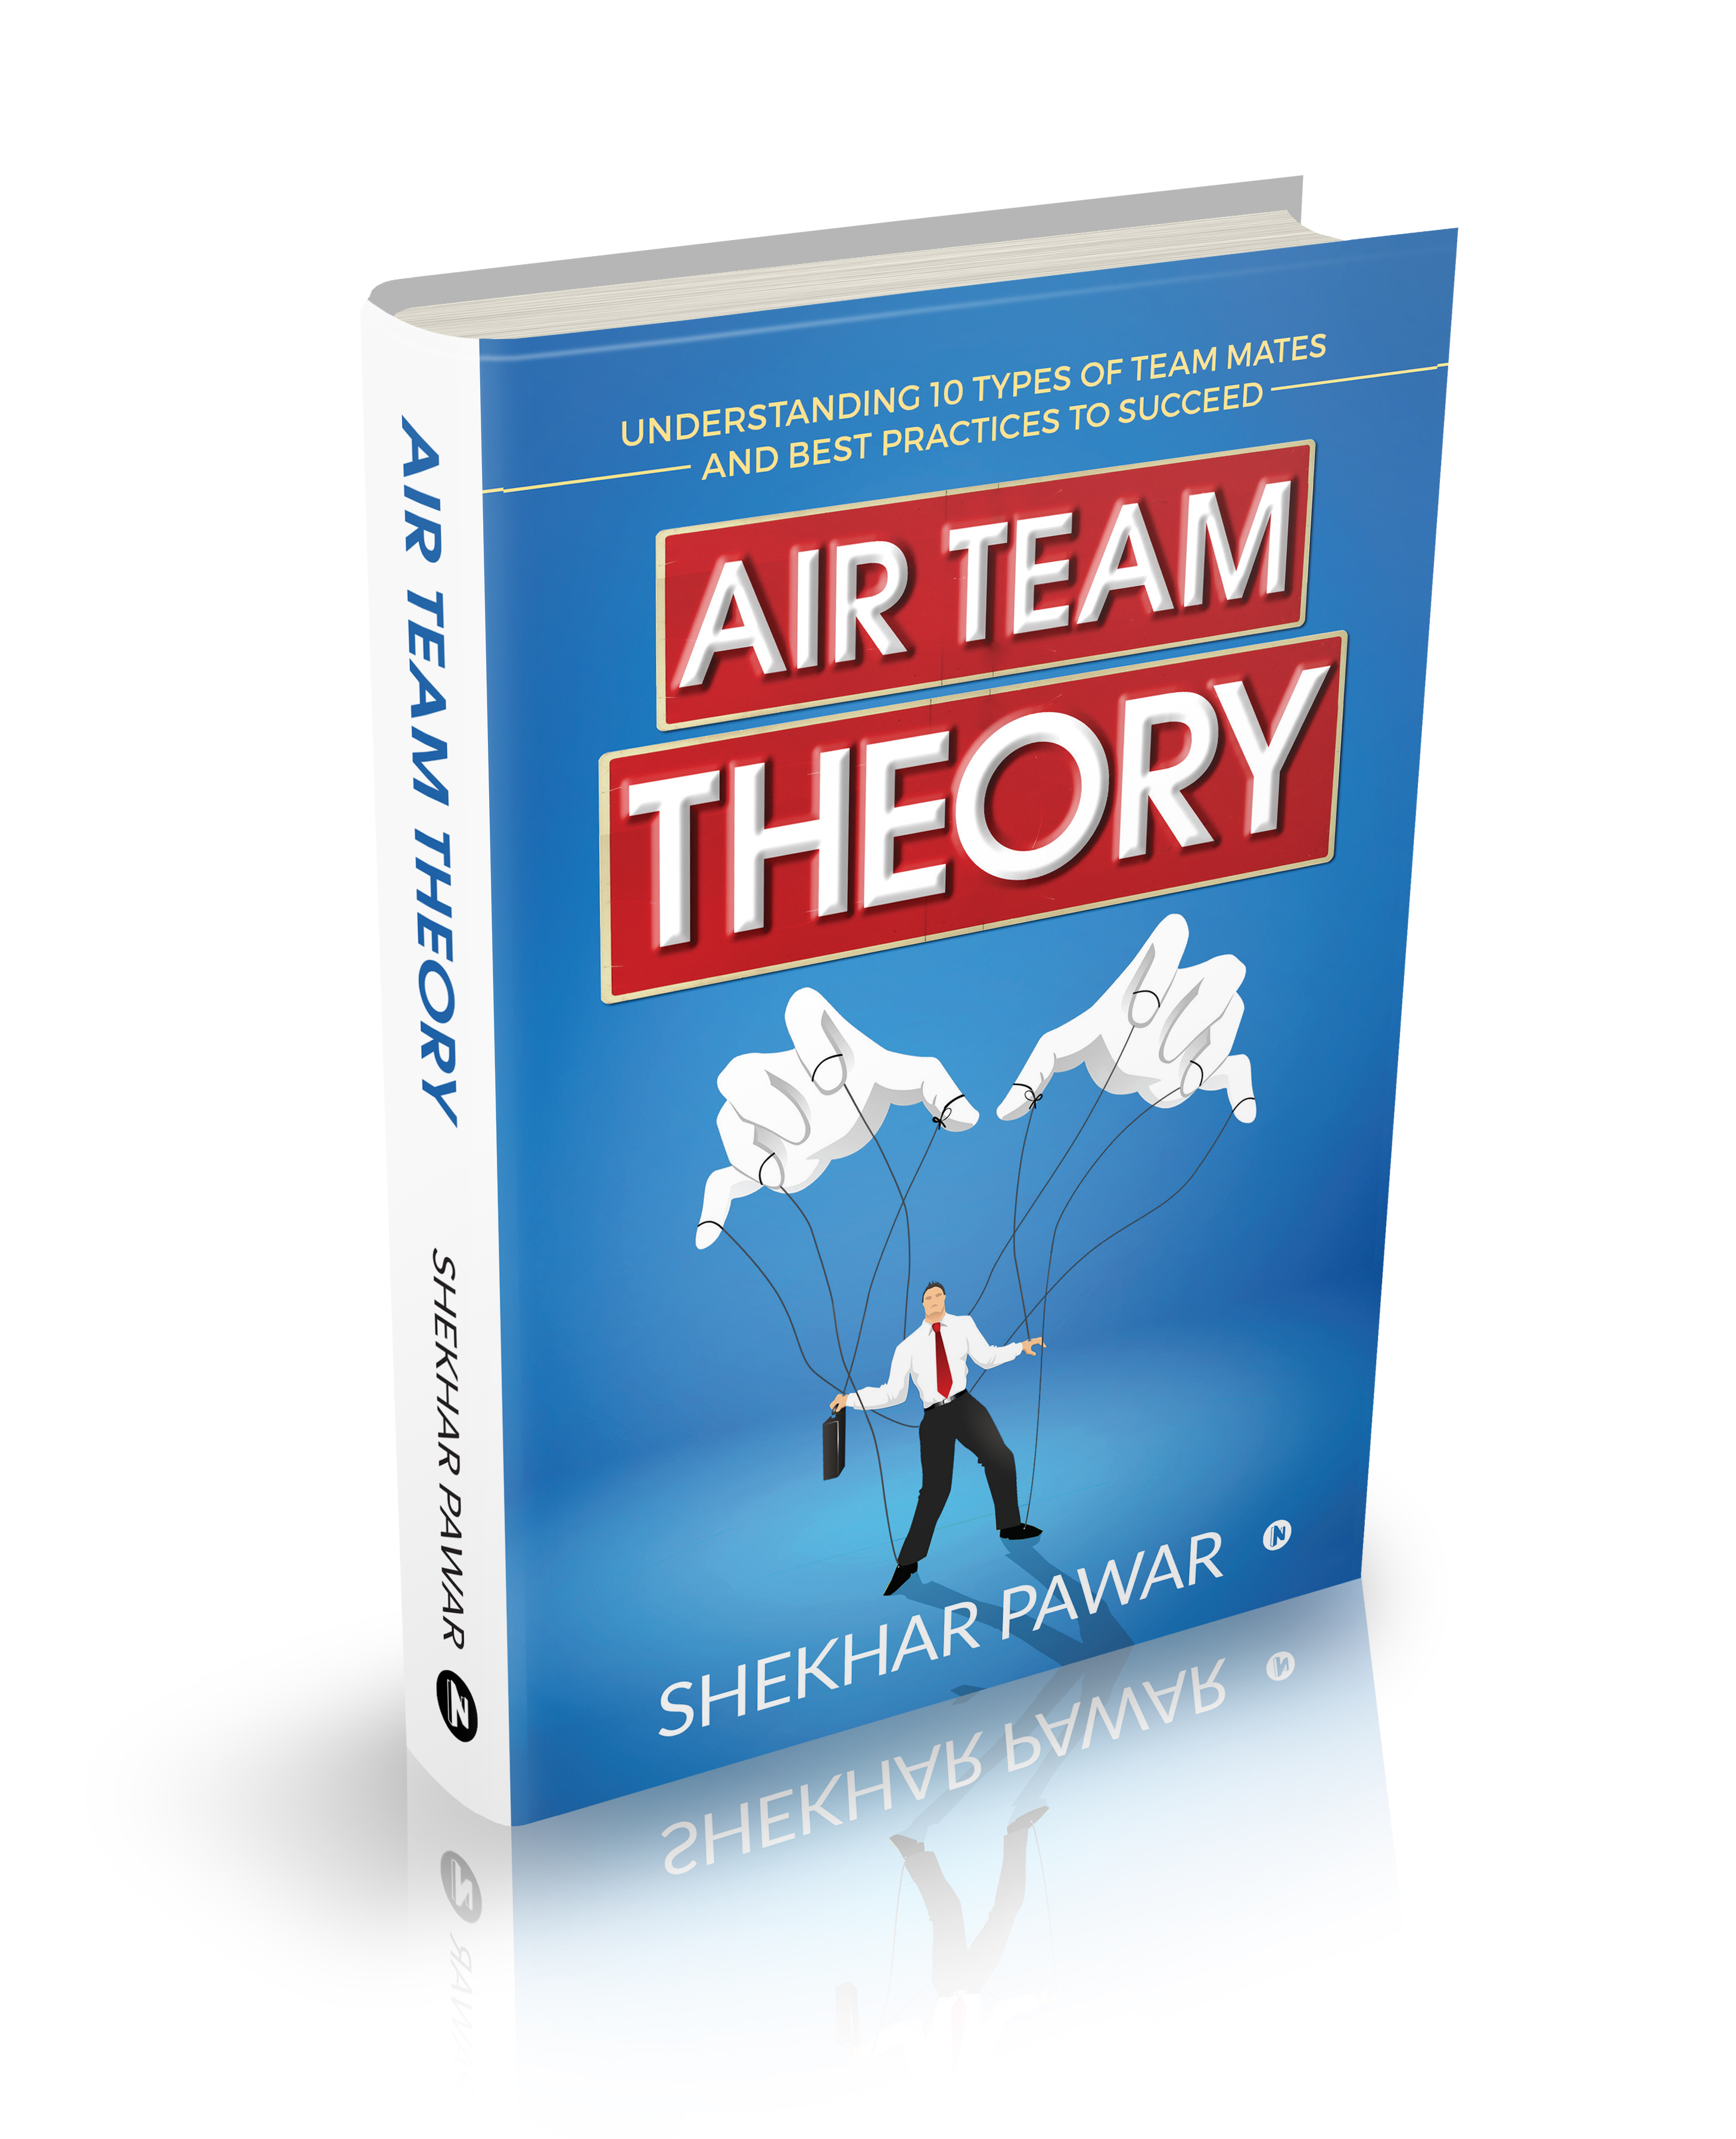 Air Team Theory : Understanding 10 Types of Team Mates and Best Practices to Succeed